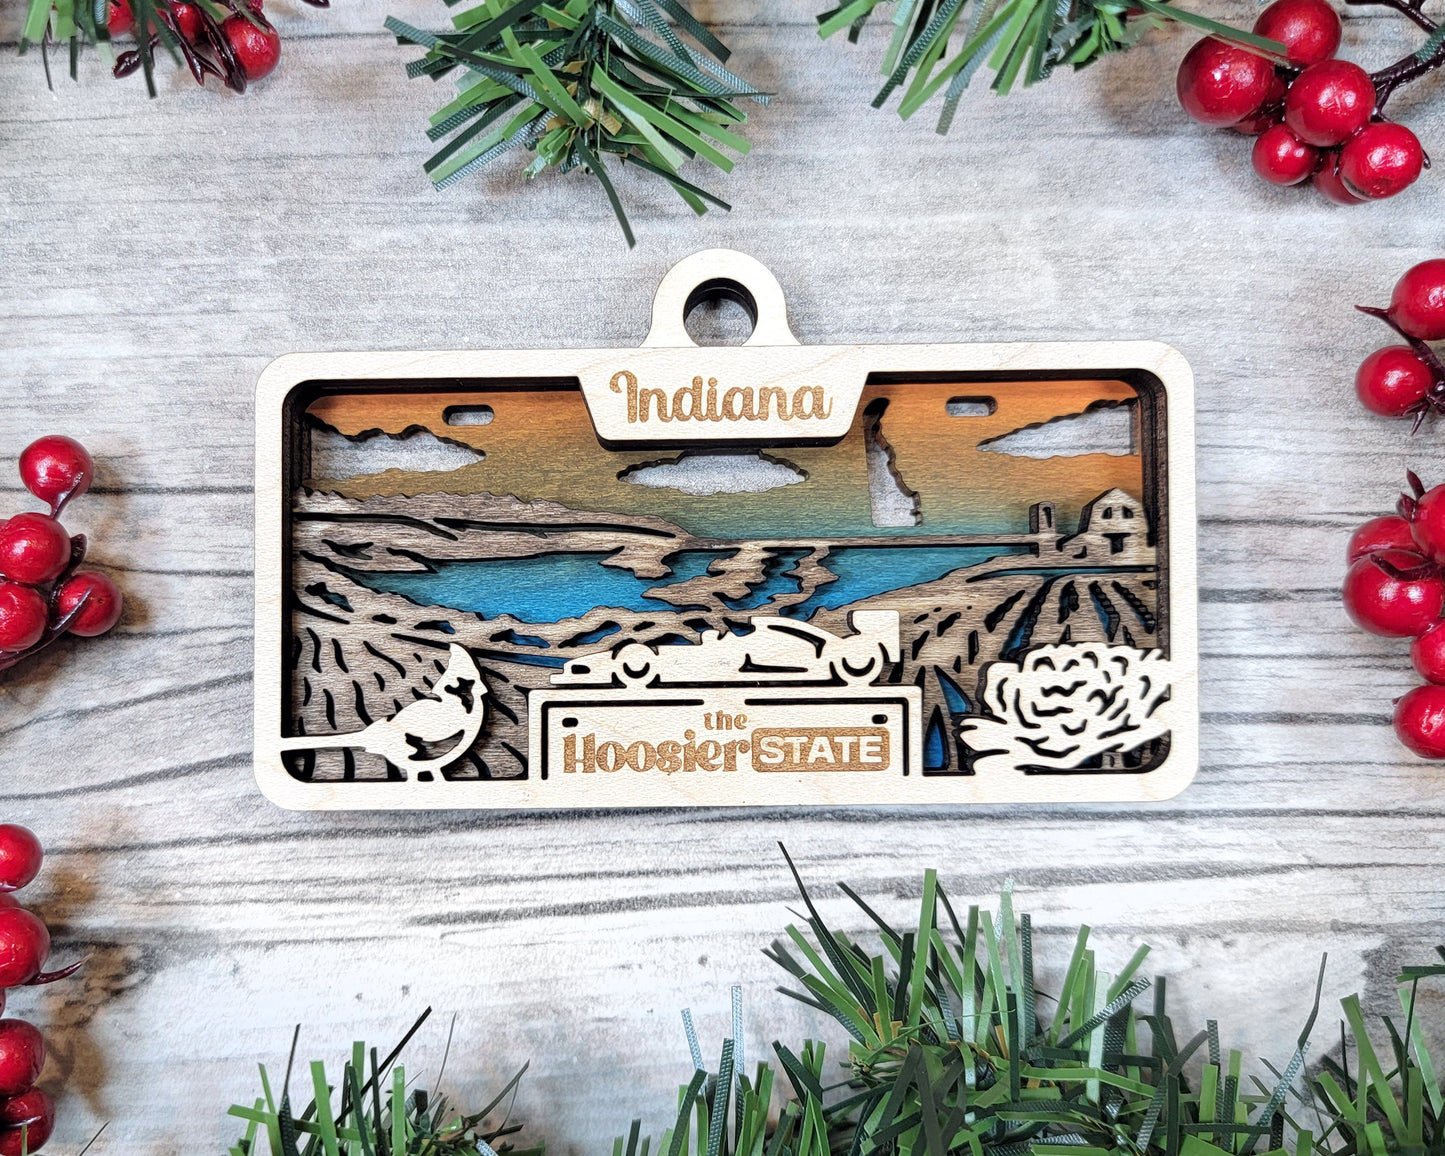 Indiana State Plate Ornament and Signage - SVG File Download - Sized for Glowforge - Laser Ready Digital Files